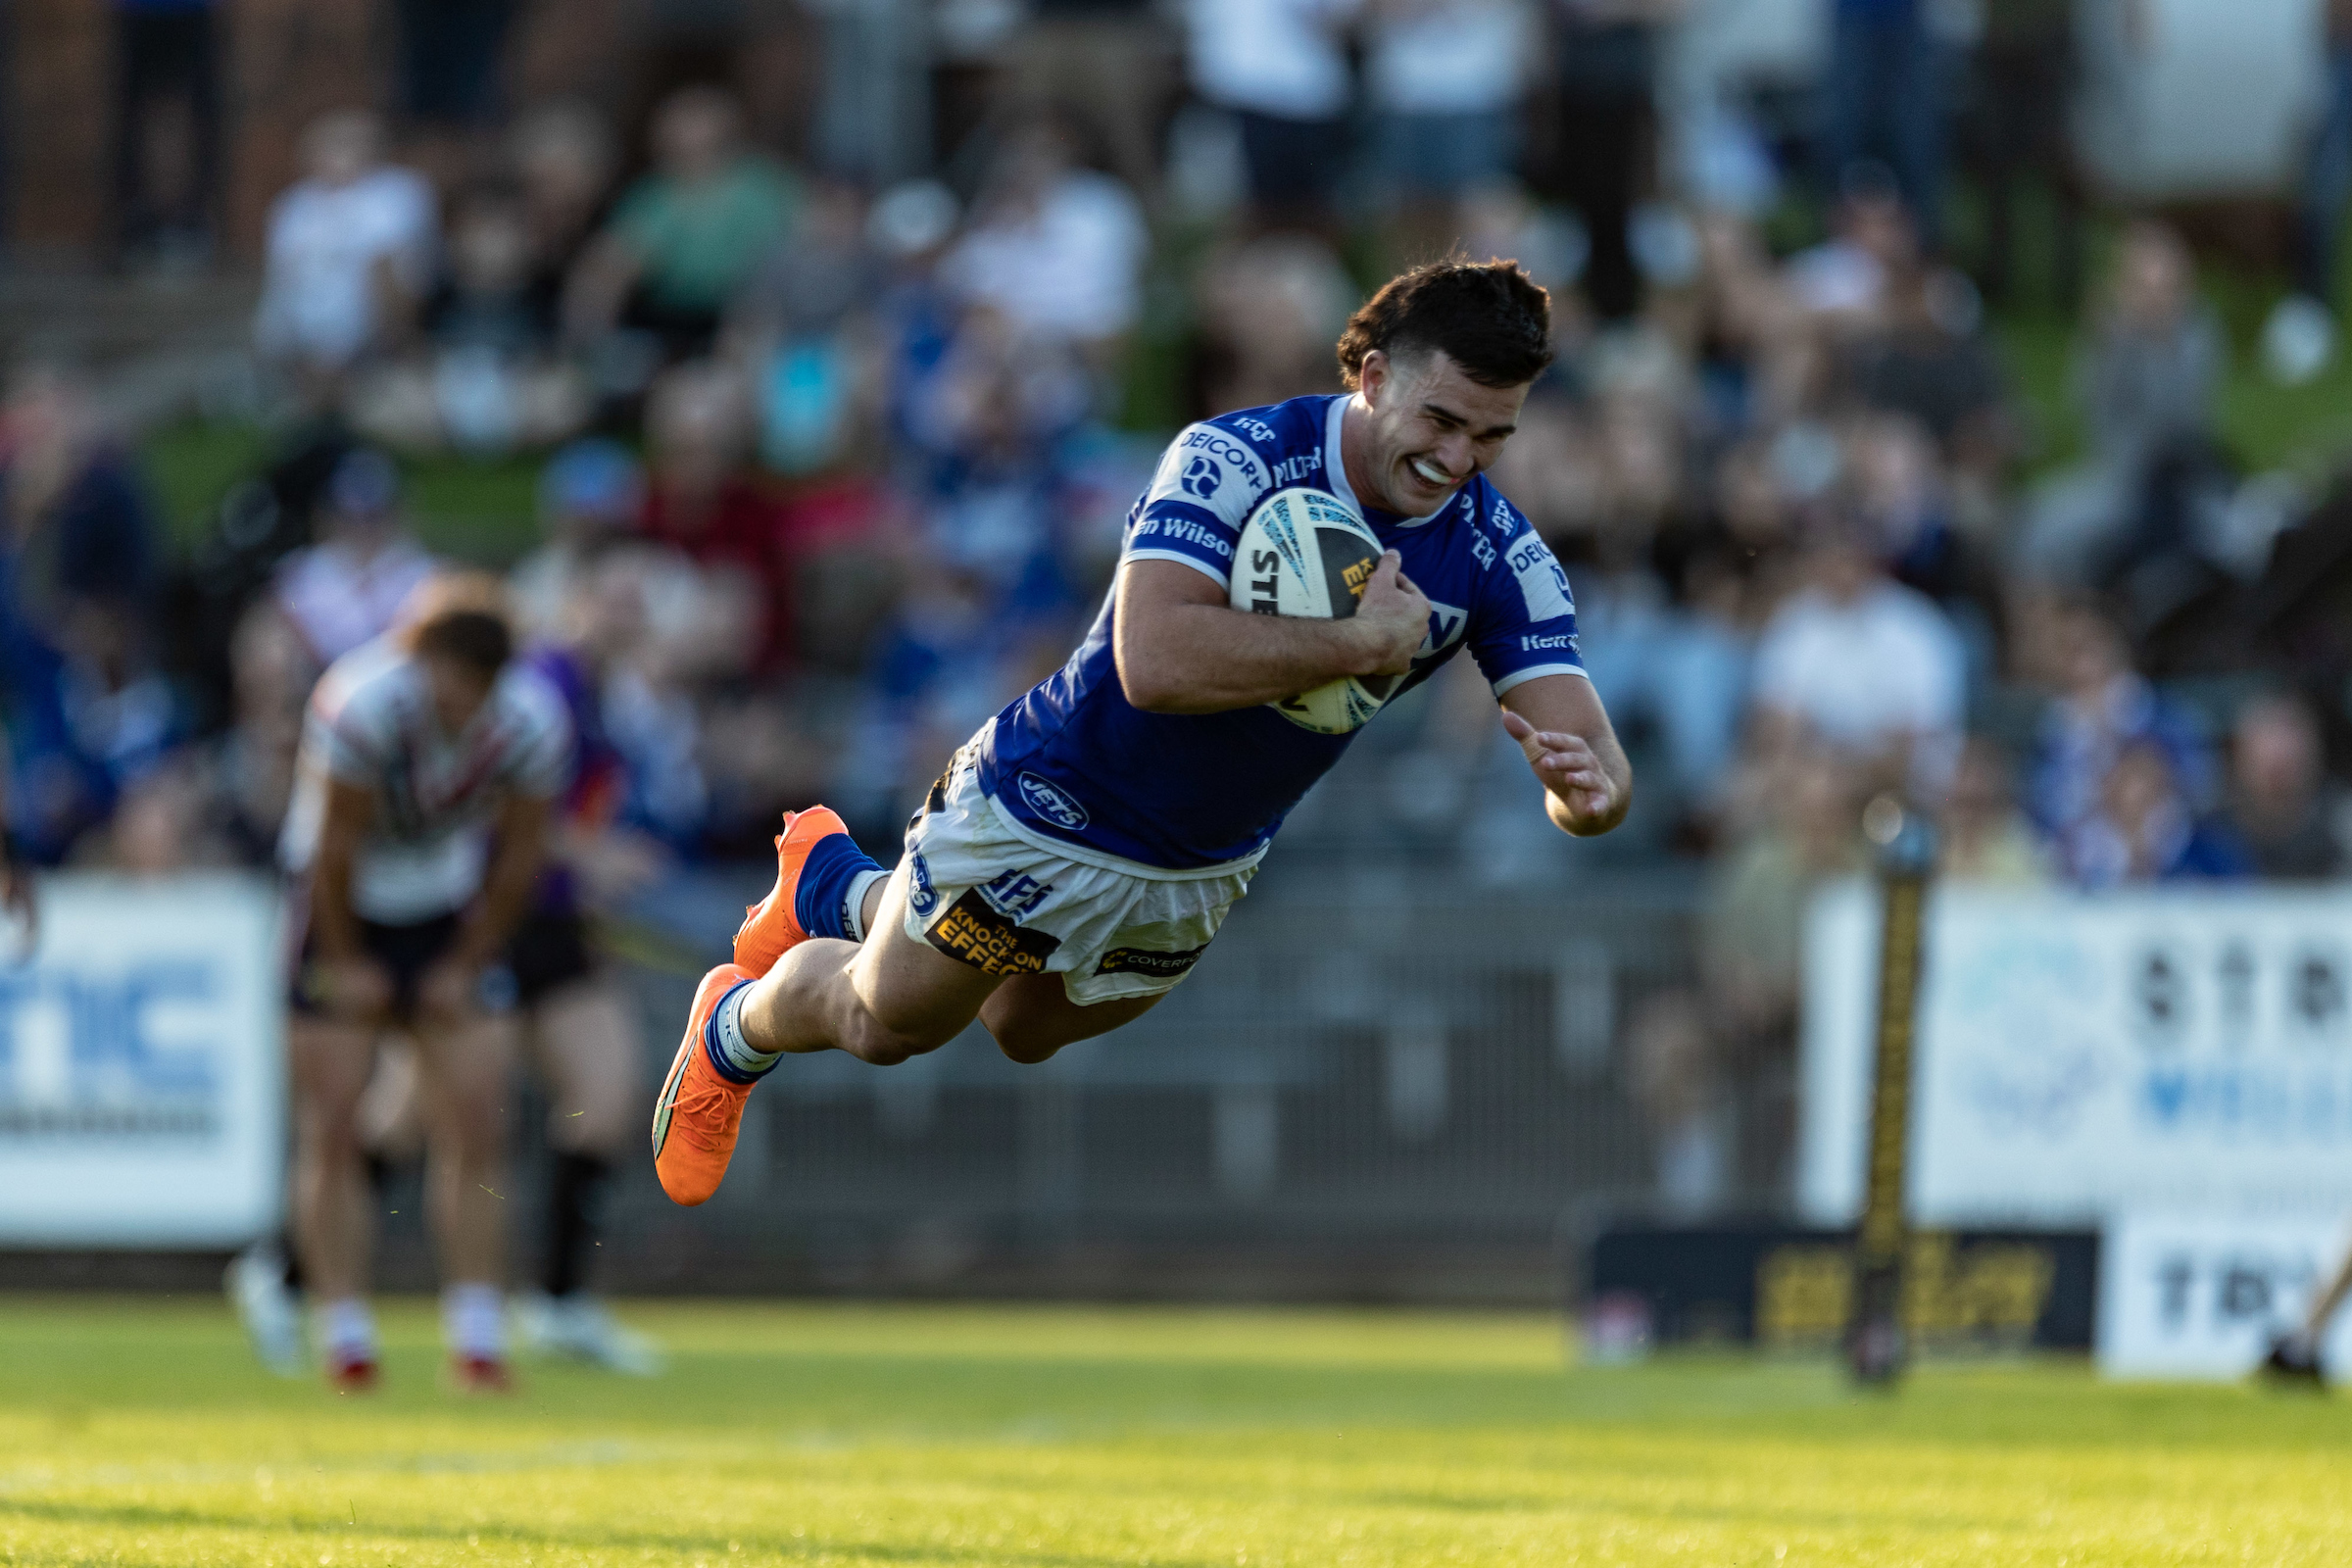 Daniel Atkinson scores against the Roosters. (Mario Facchini/mafphotography)